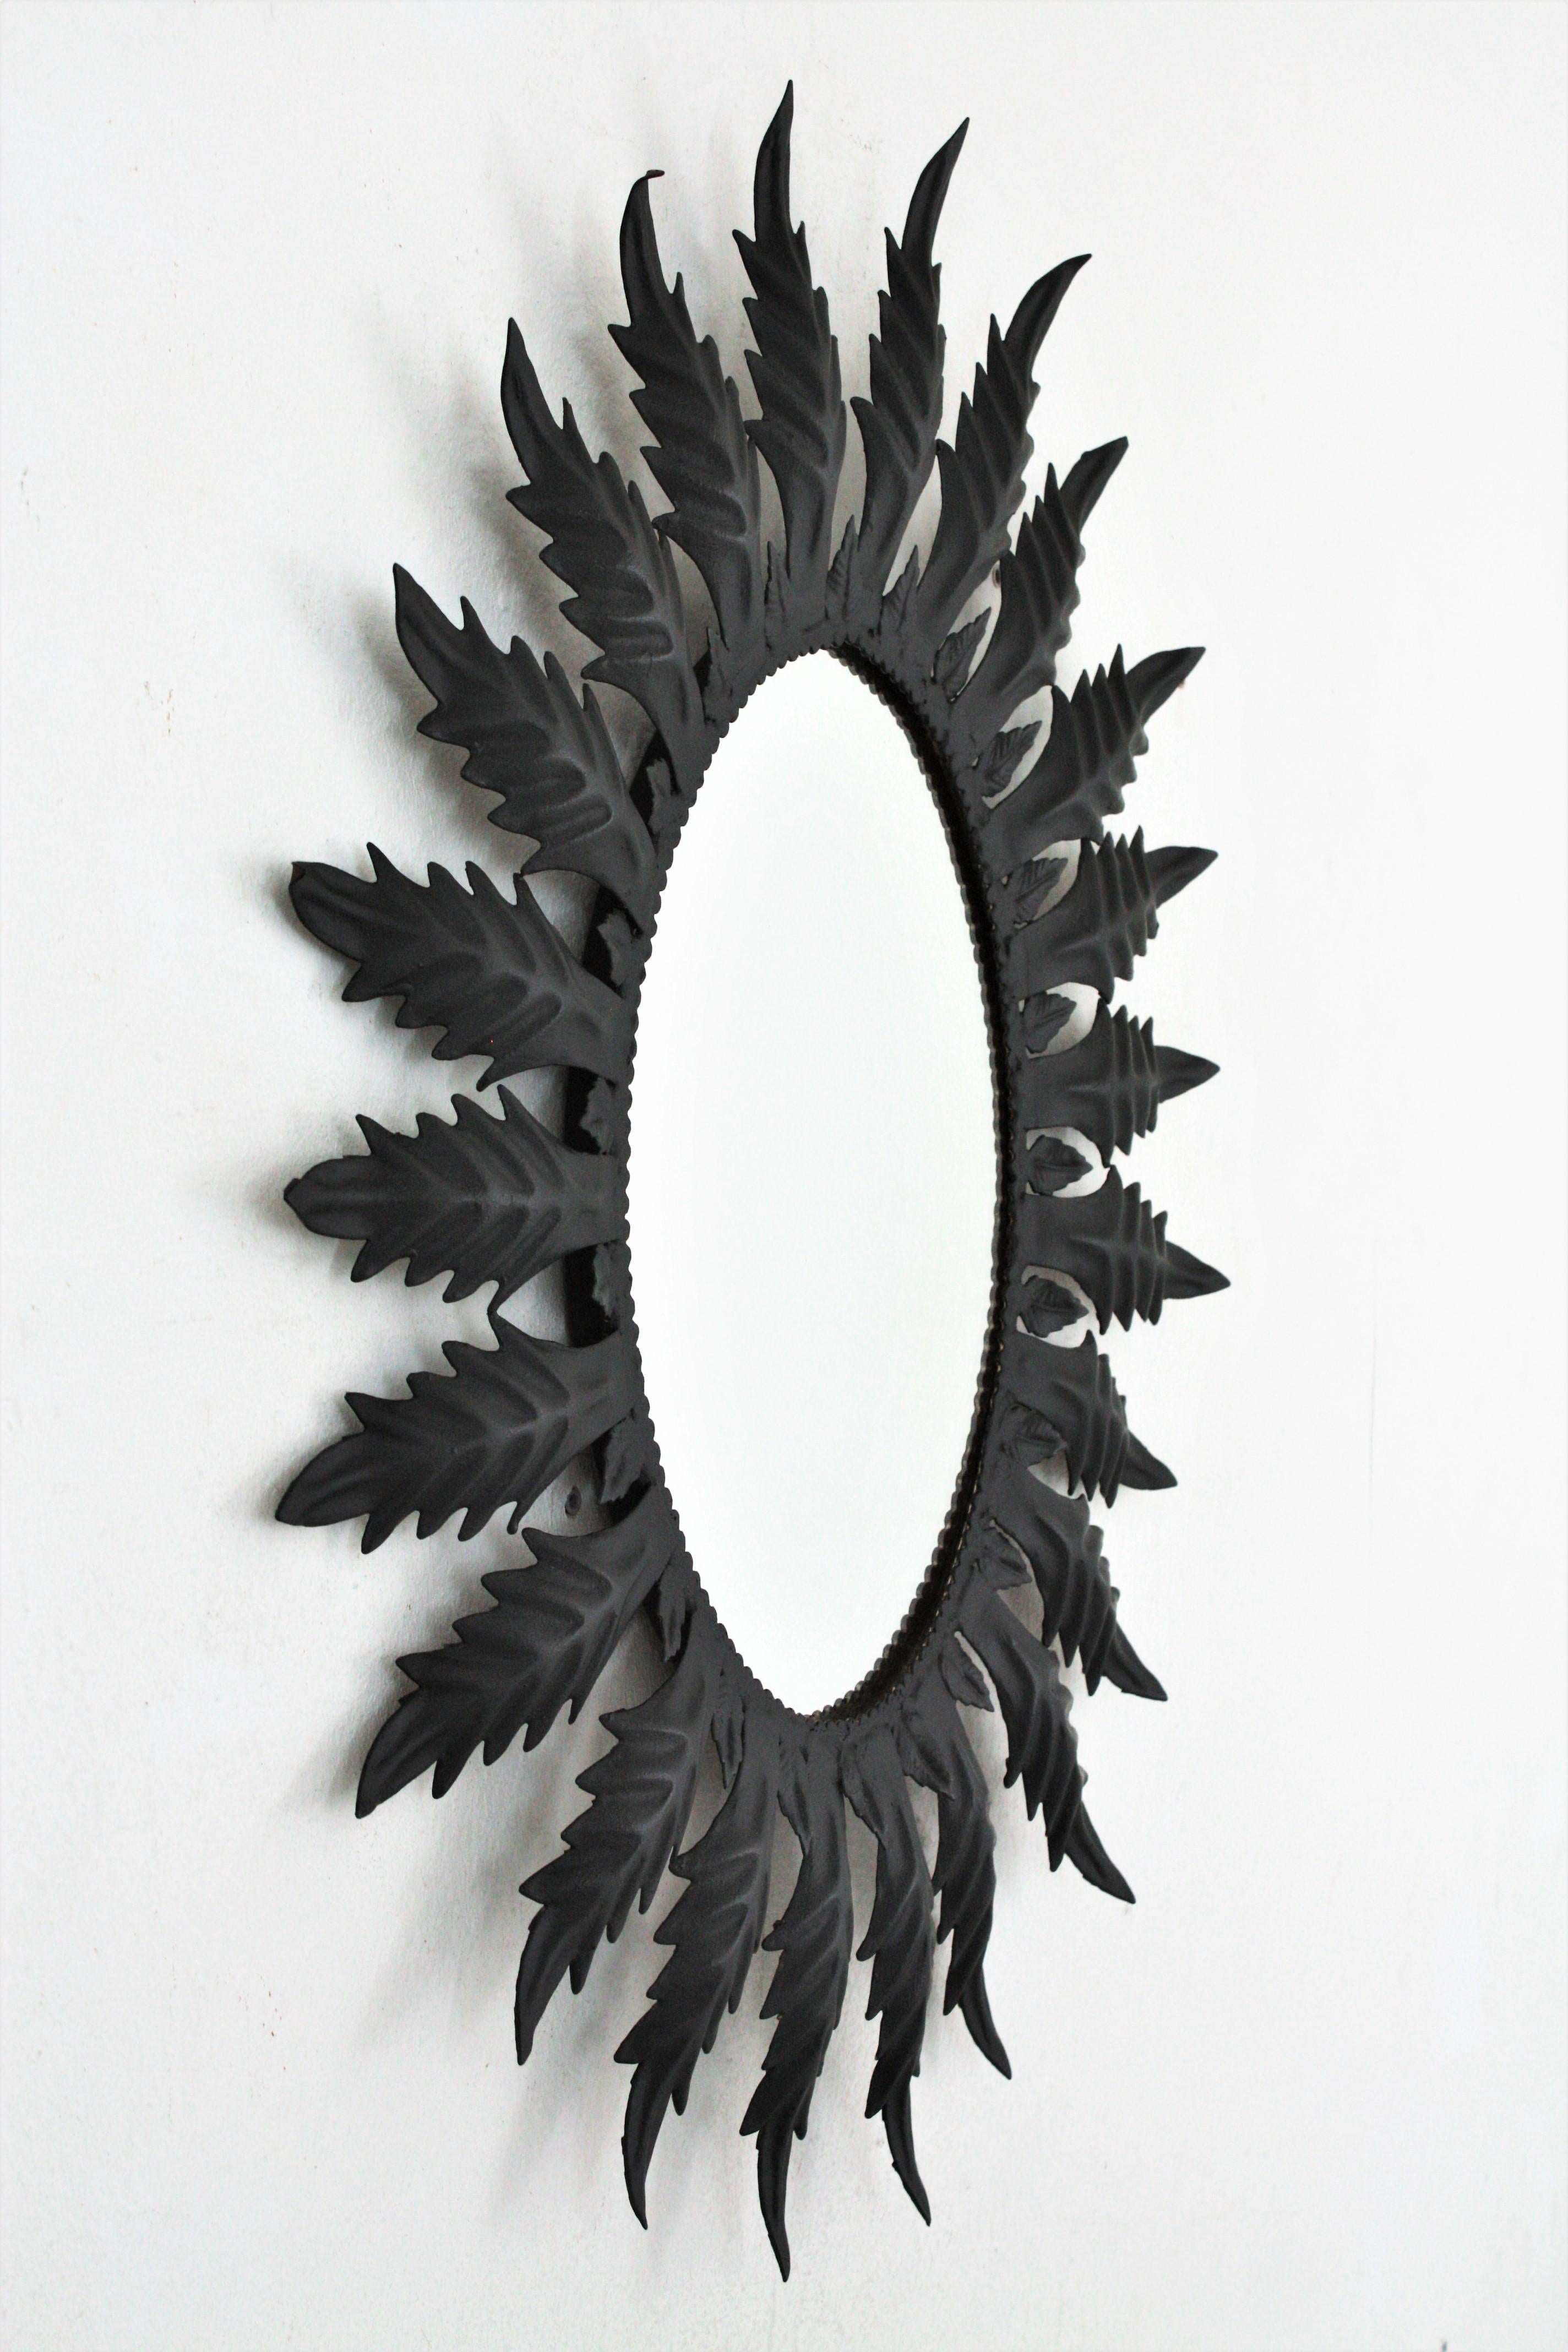 Spanish Sunburst Oval Mirror in Black Painted Iron, 1960s For Sale 2